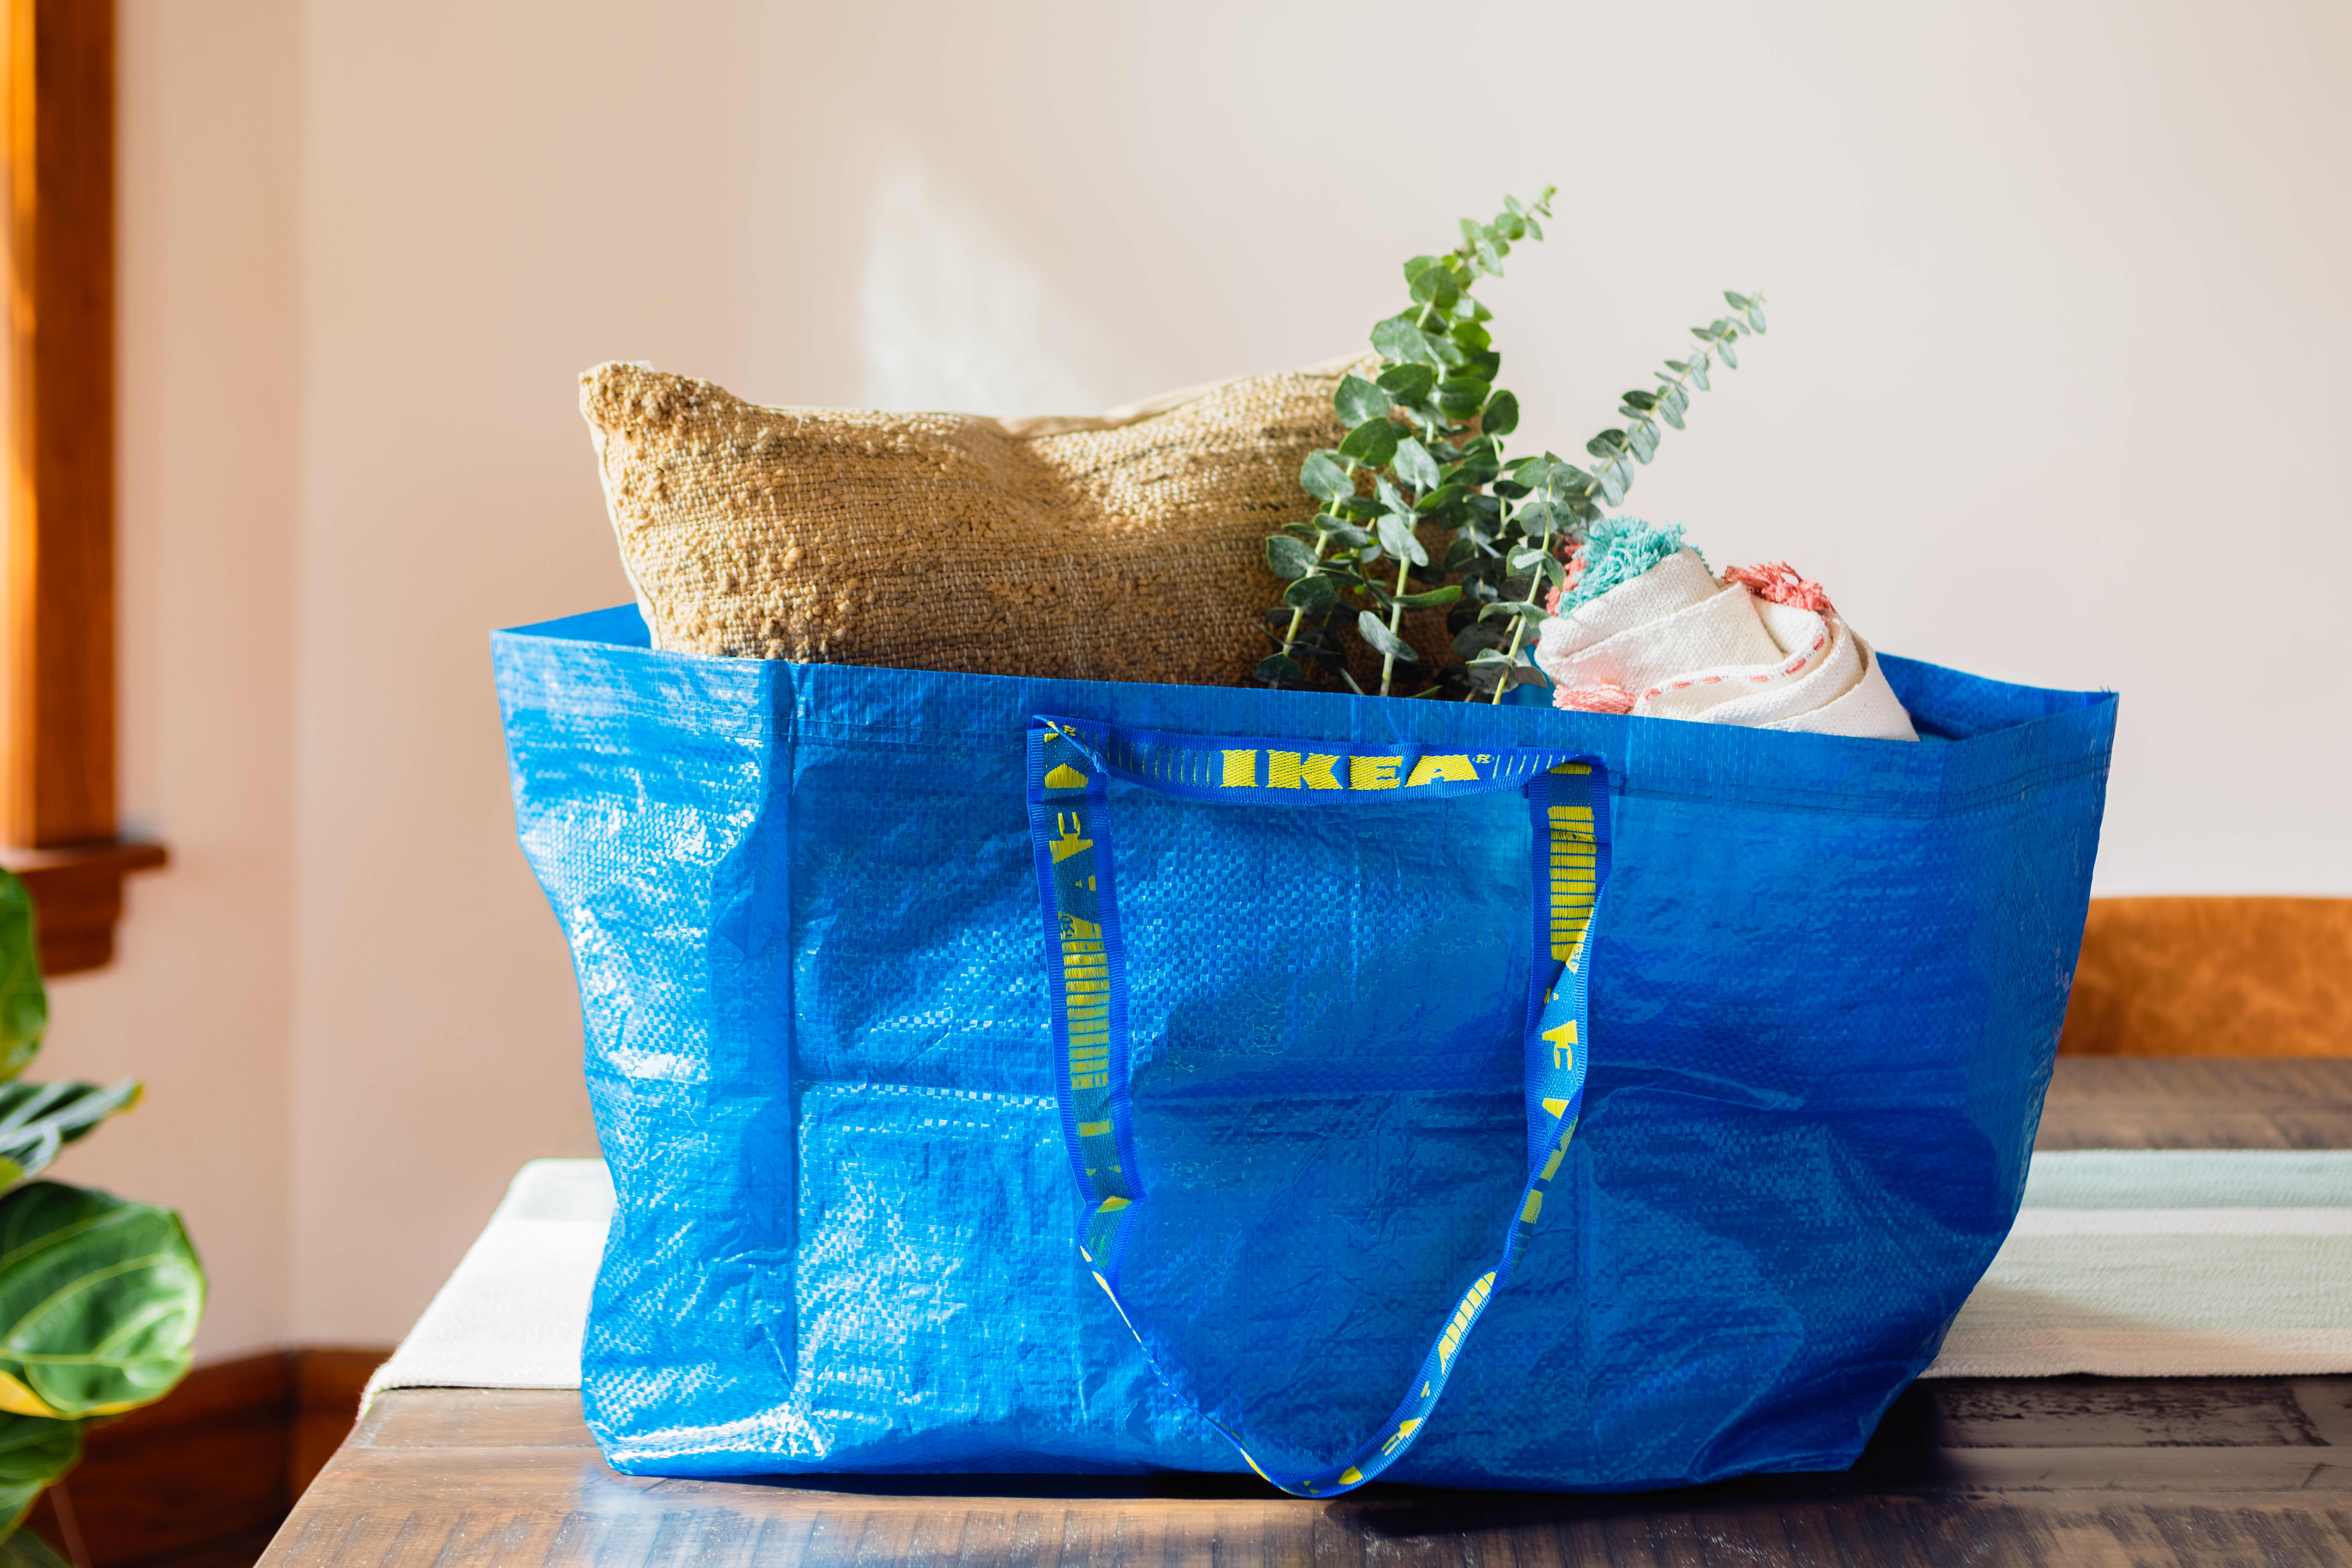 Ikea's blue bag gets even bigger in a pair of oversized campaigns